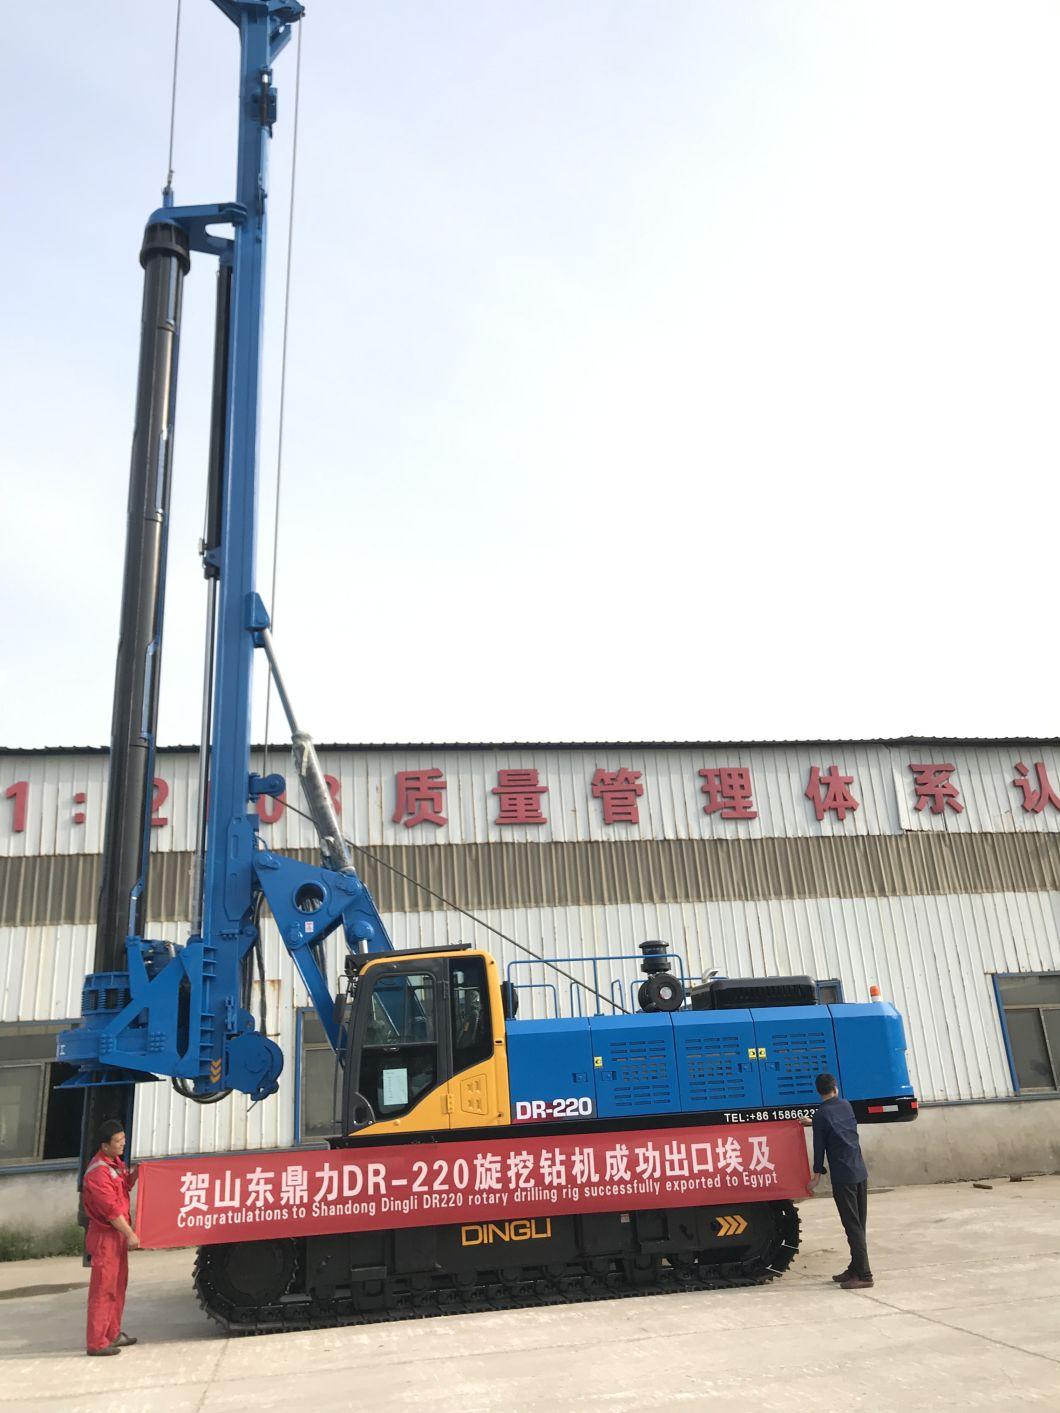 Good Quality 60 Meter Economical/Hydraulic/Crawler Drilling Rig for Sale Dr-220 Price Has Passed CE SGS Certification